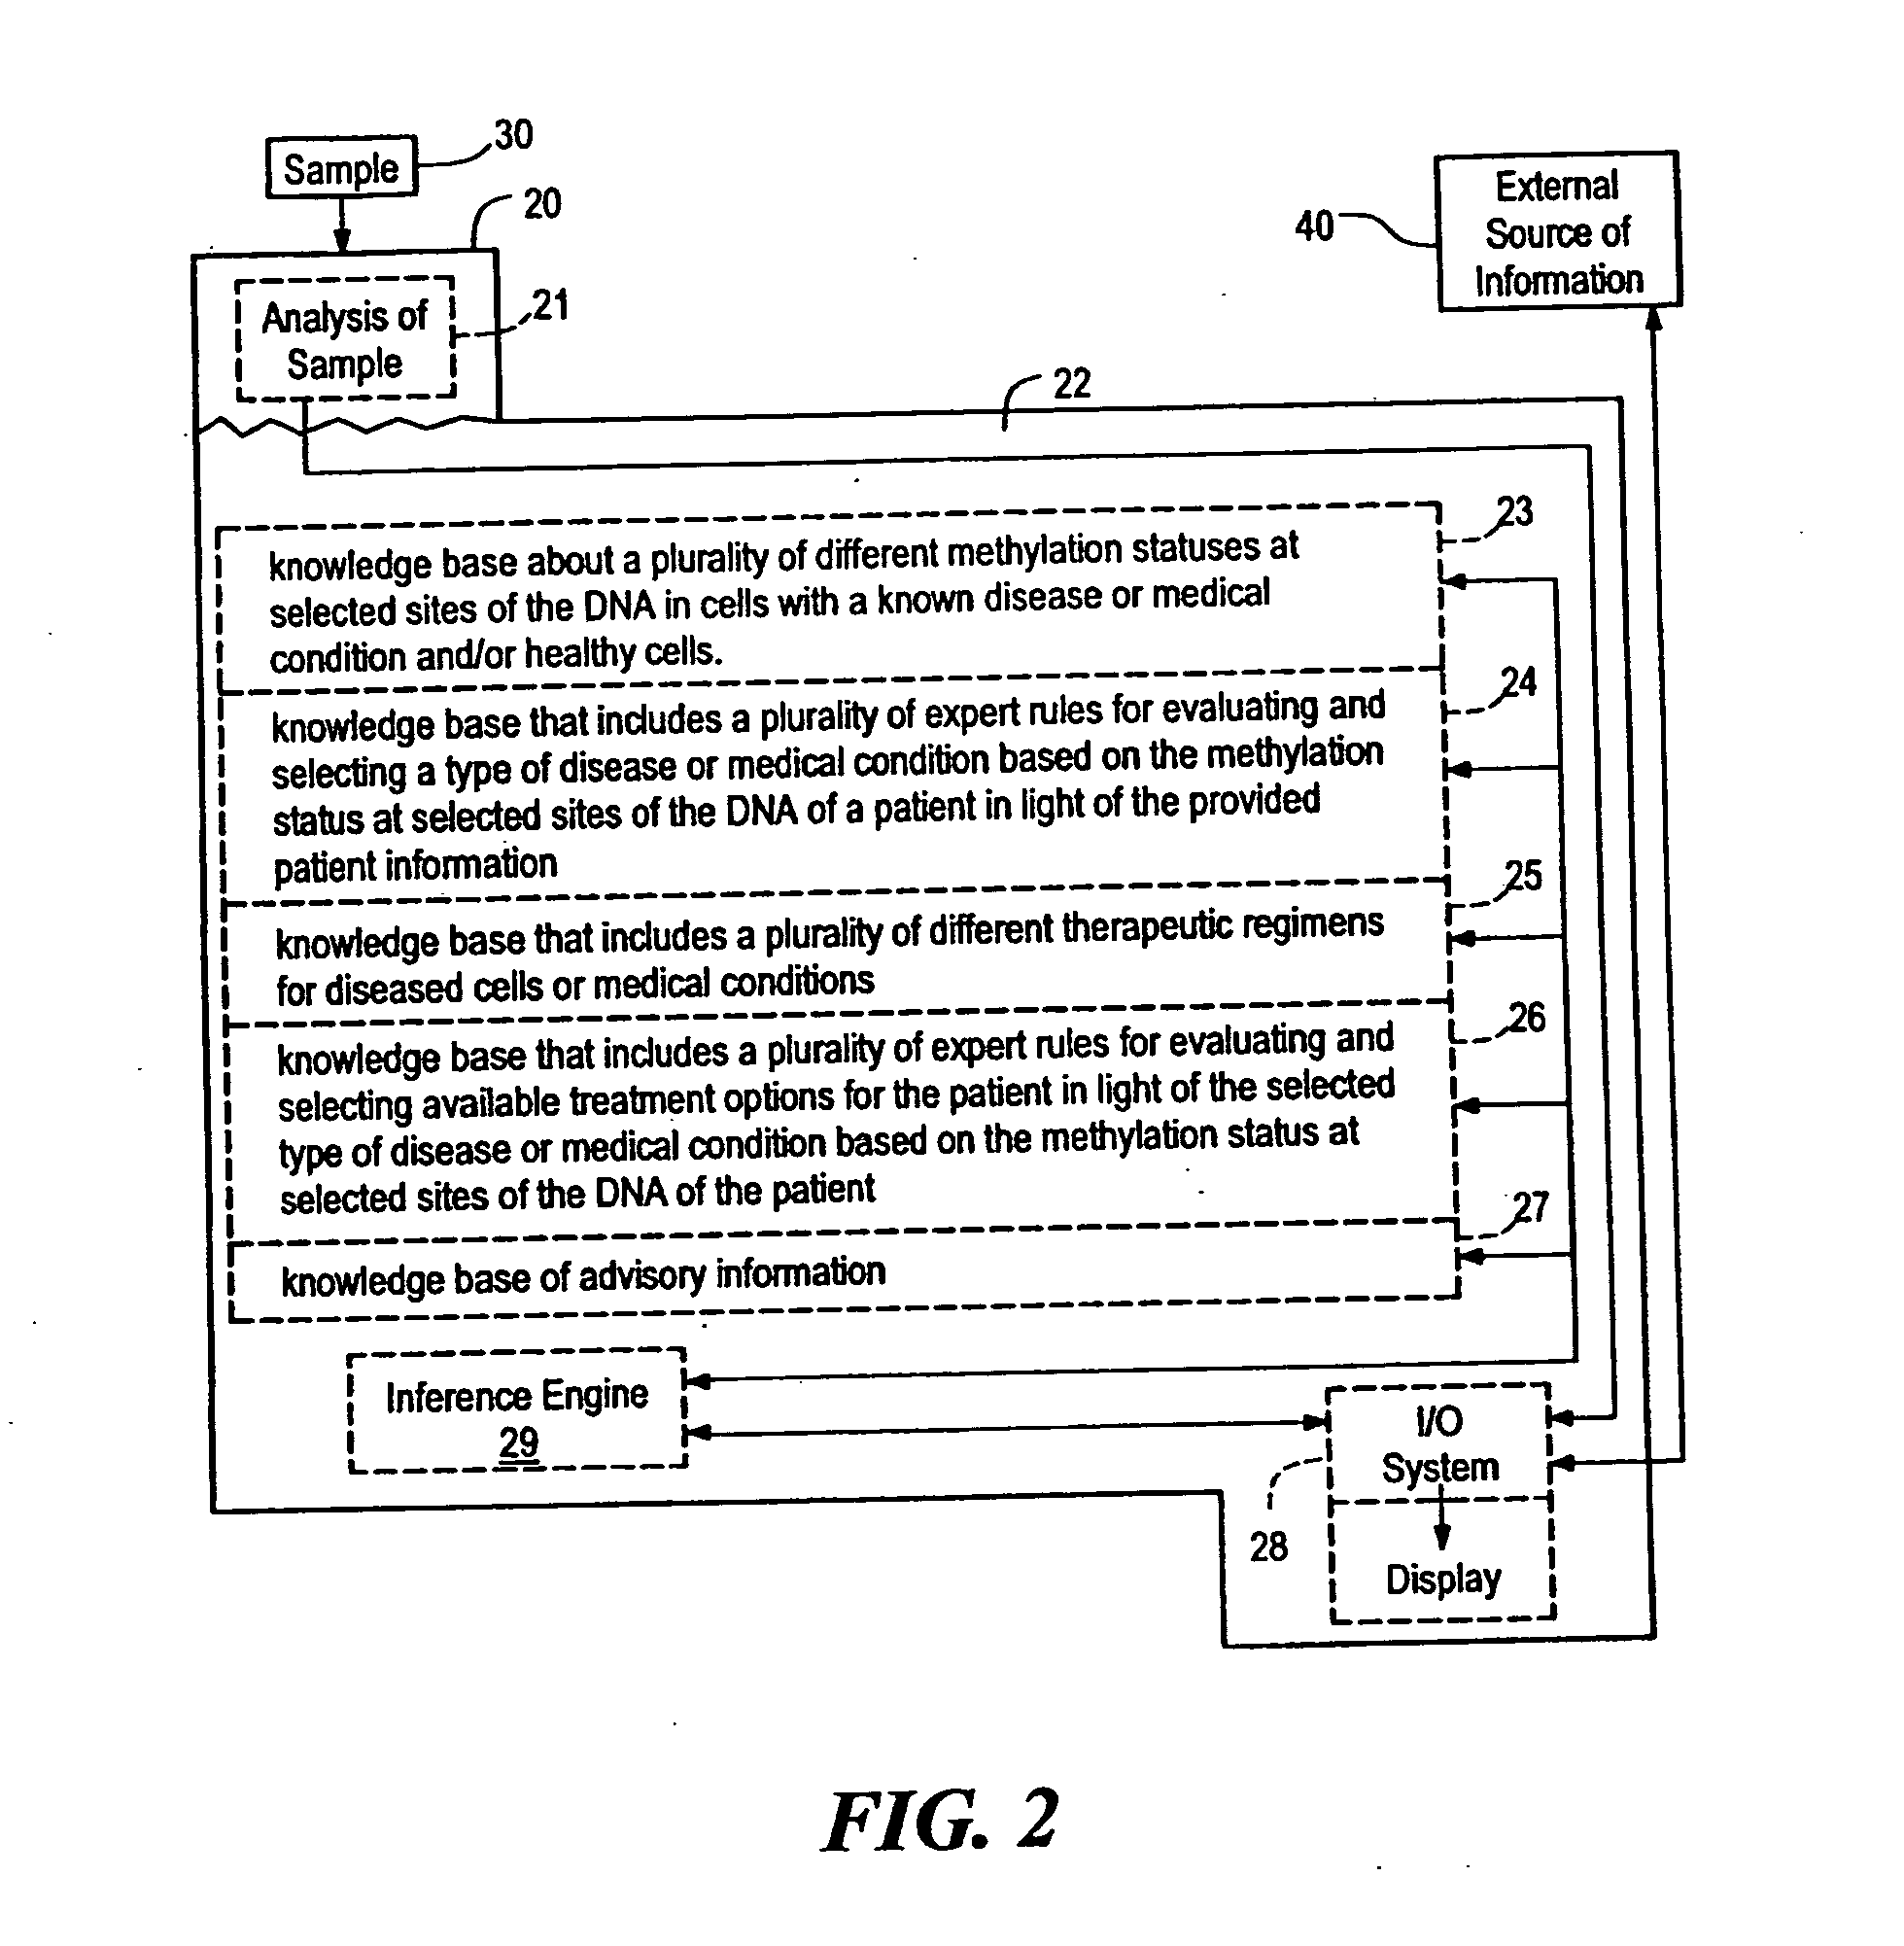 Systems, methods and computer program products for guiding selection of a therapeutic treatment regimen based on the methylation status of the DNA